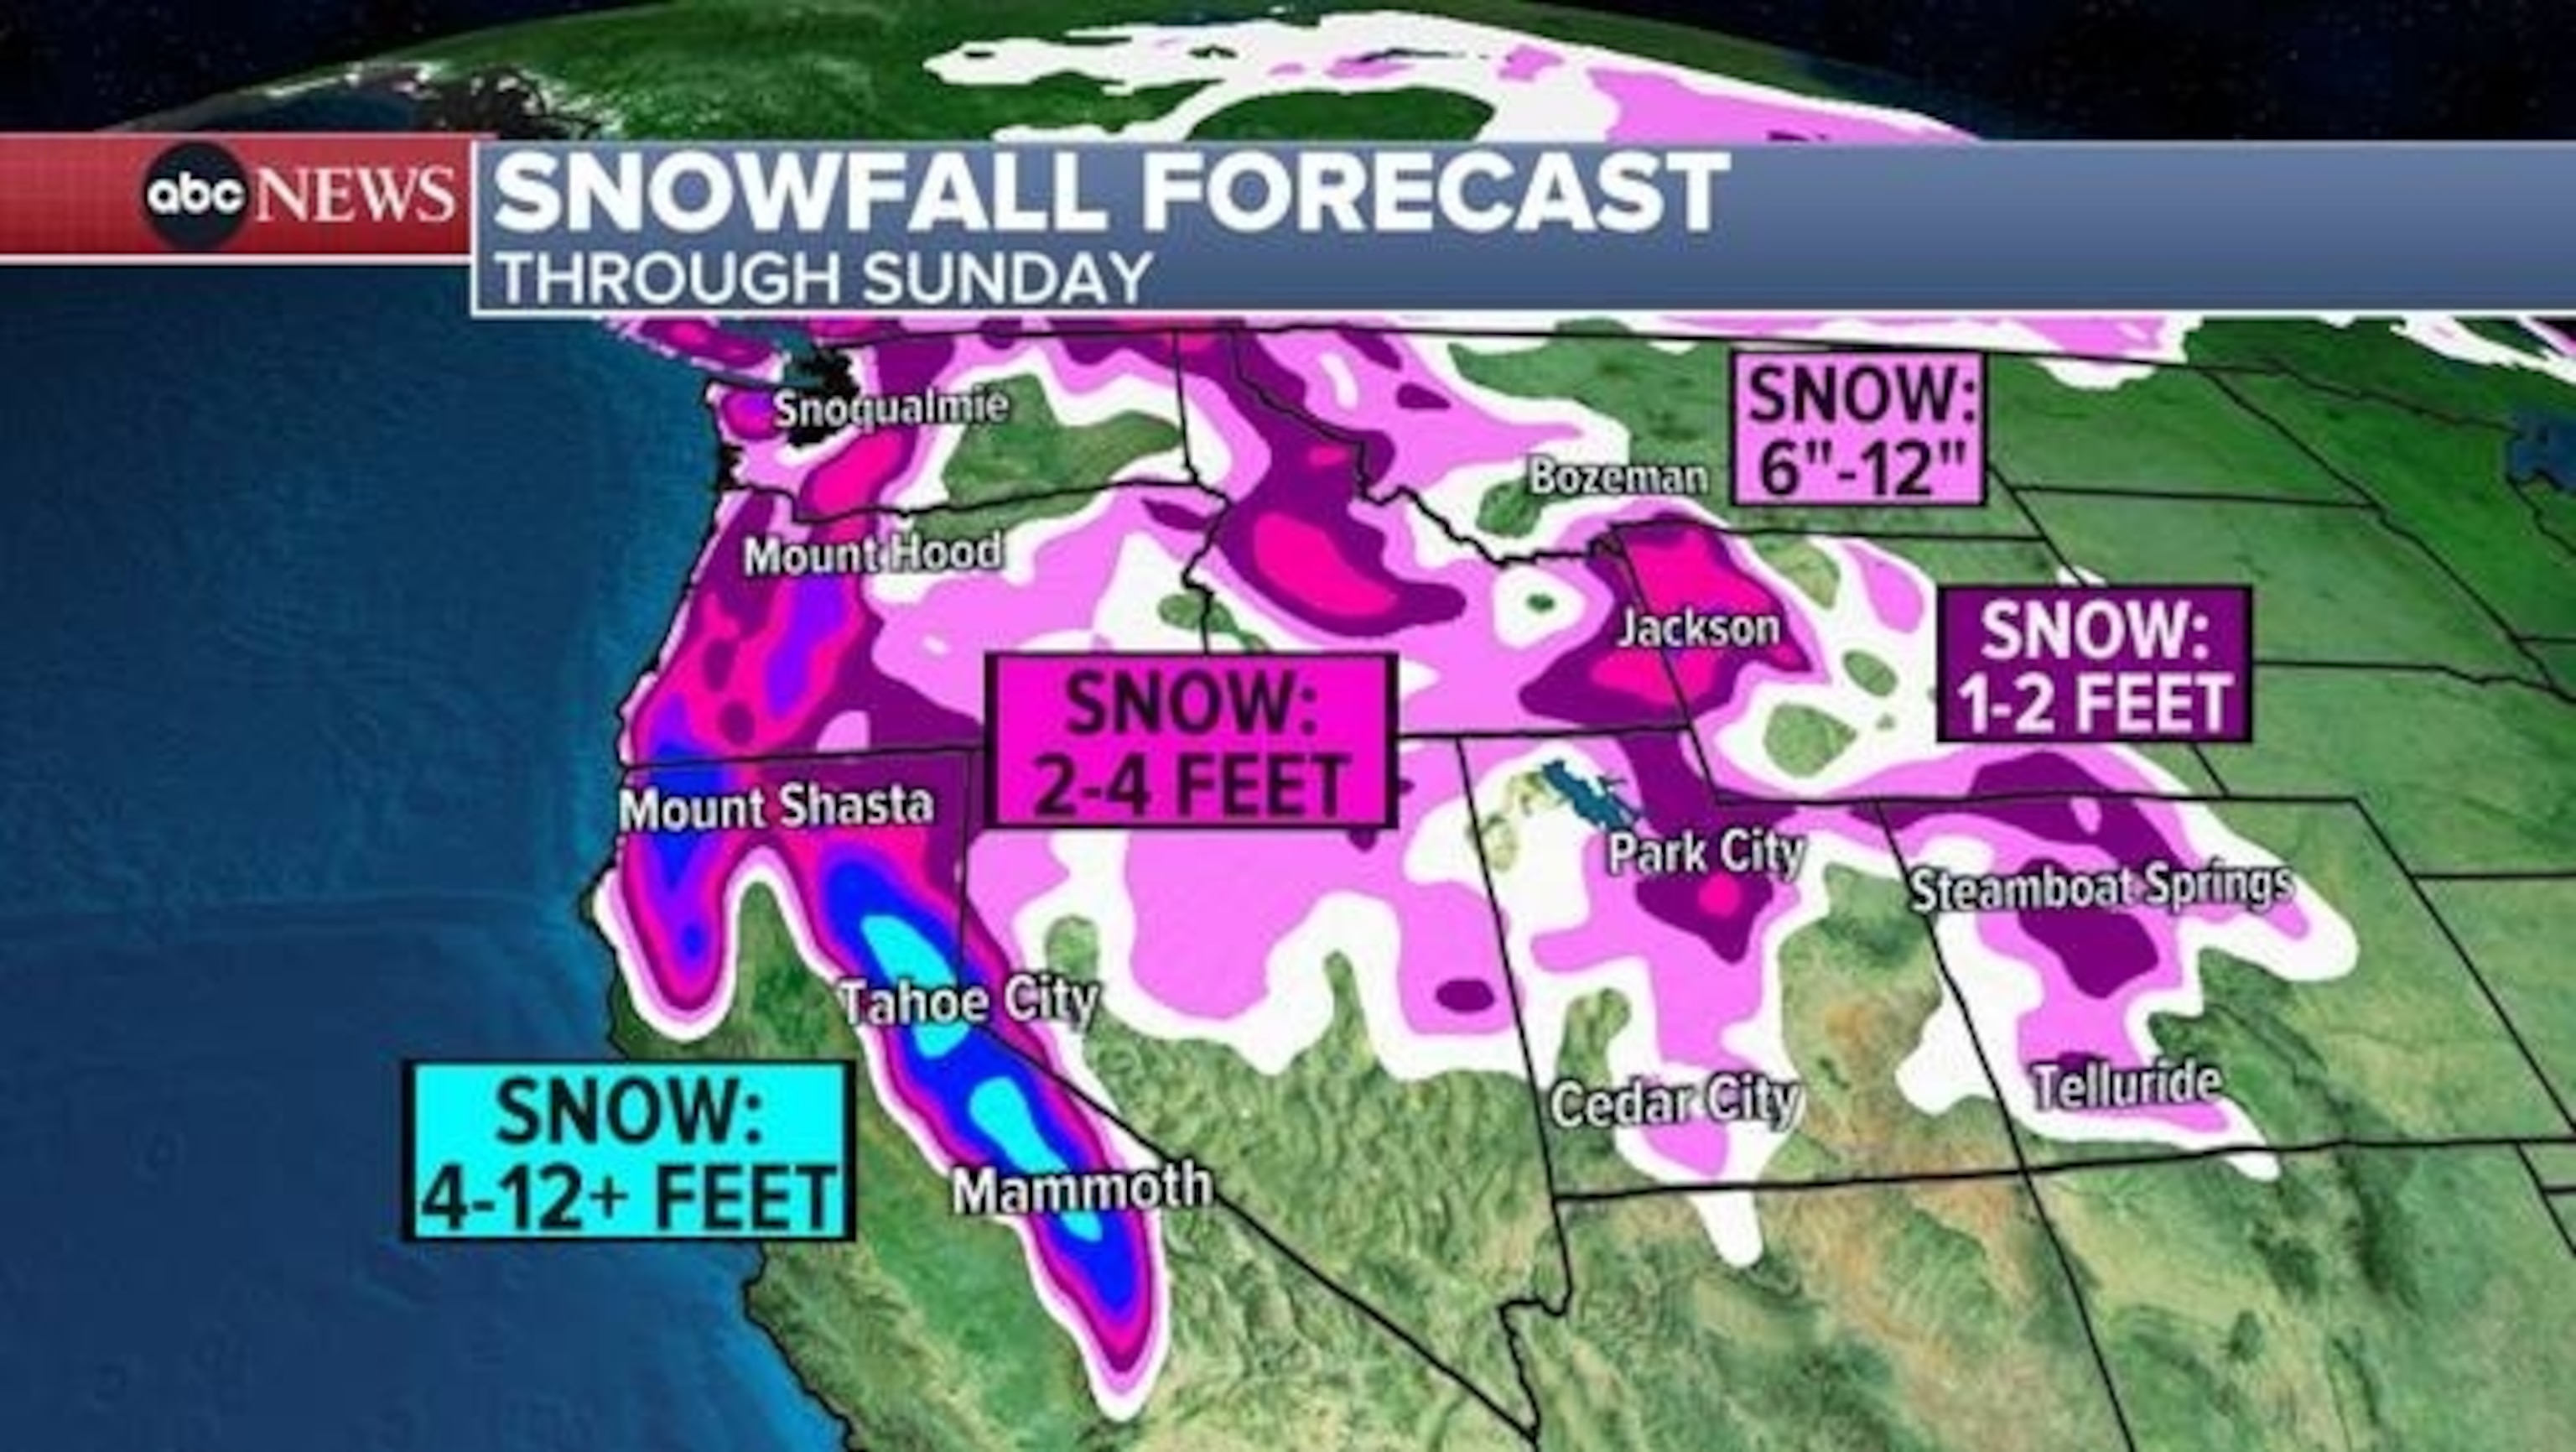 PHOTO: Winter Storm Warning, Avalanche Warning and Blizzard Warning issued for the West including California.